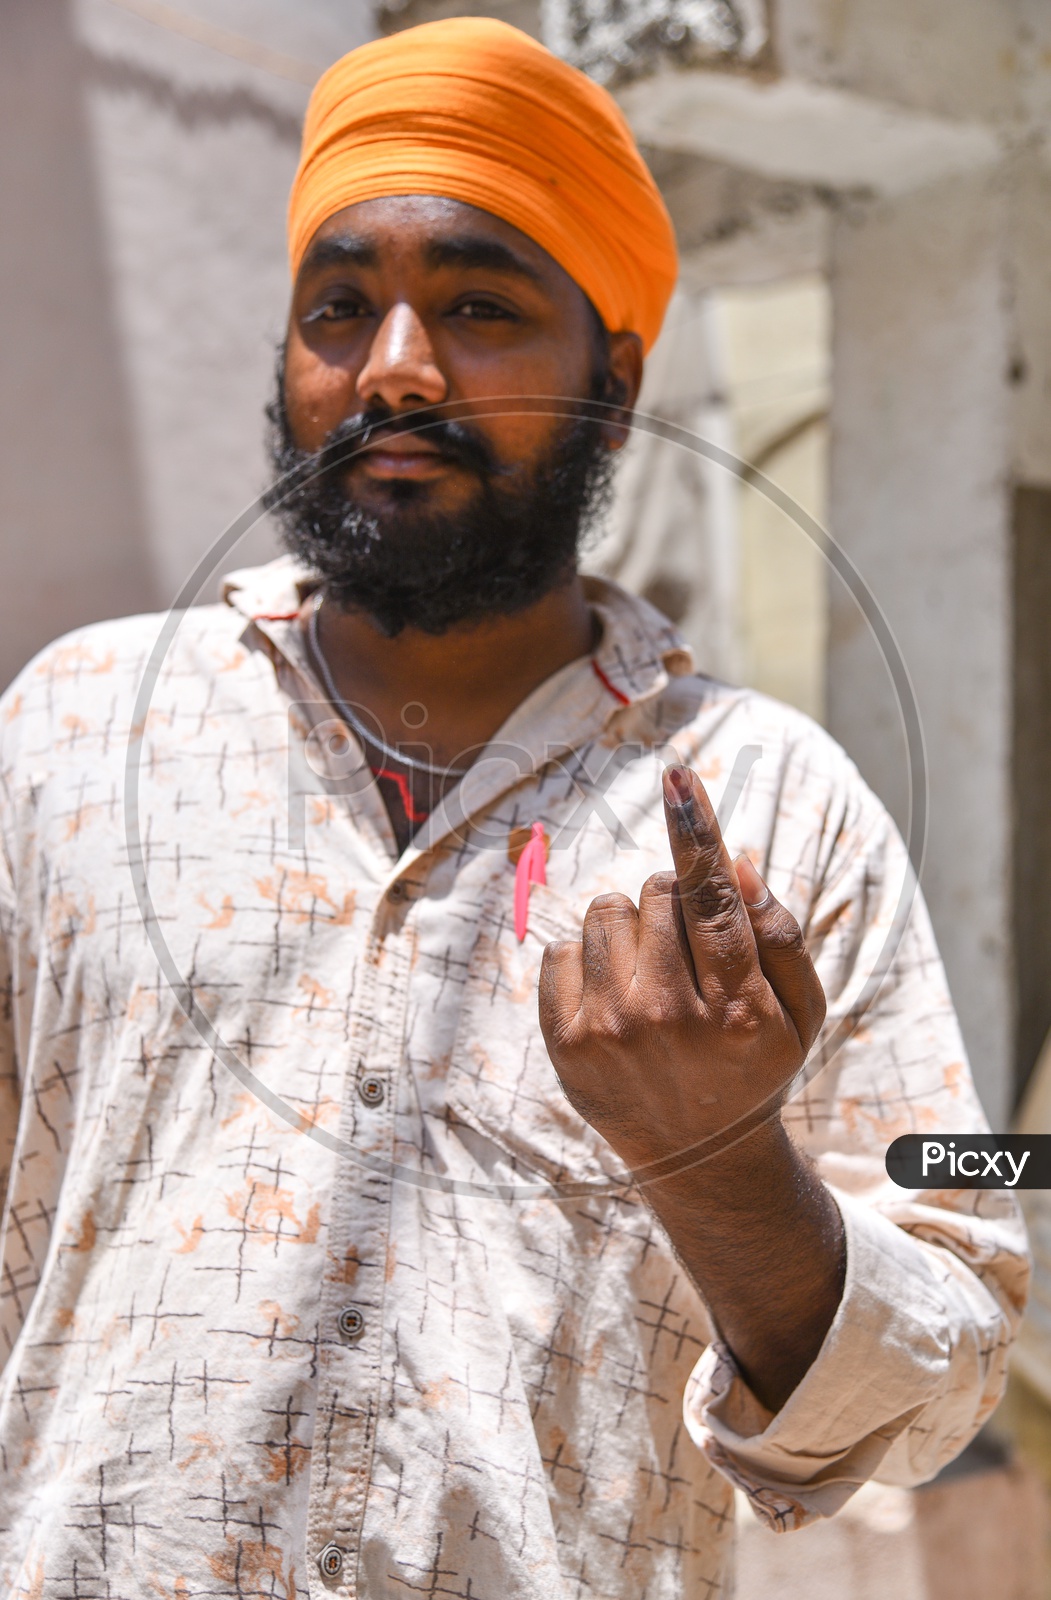 A Sikh Voter showing his Inked finger after voting.